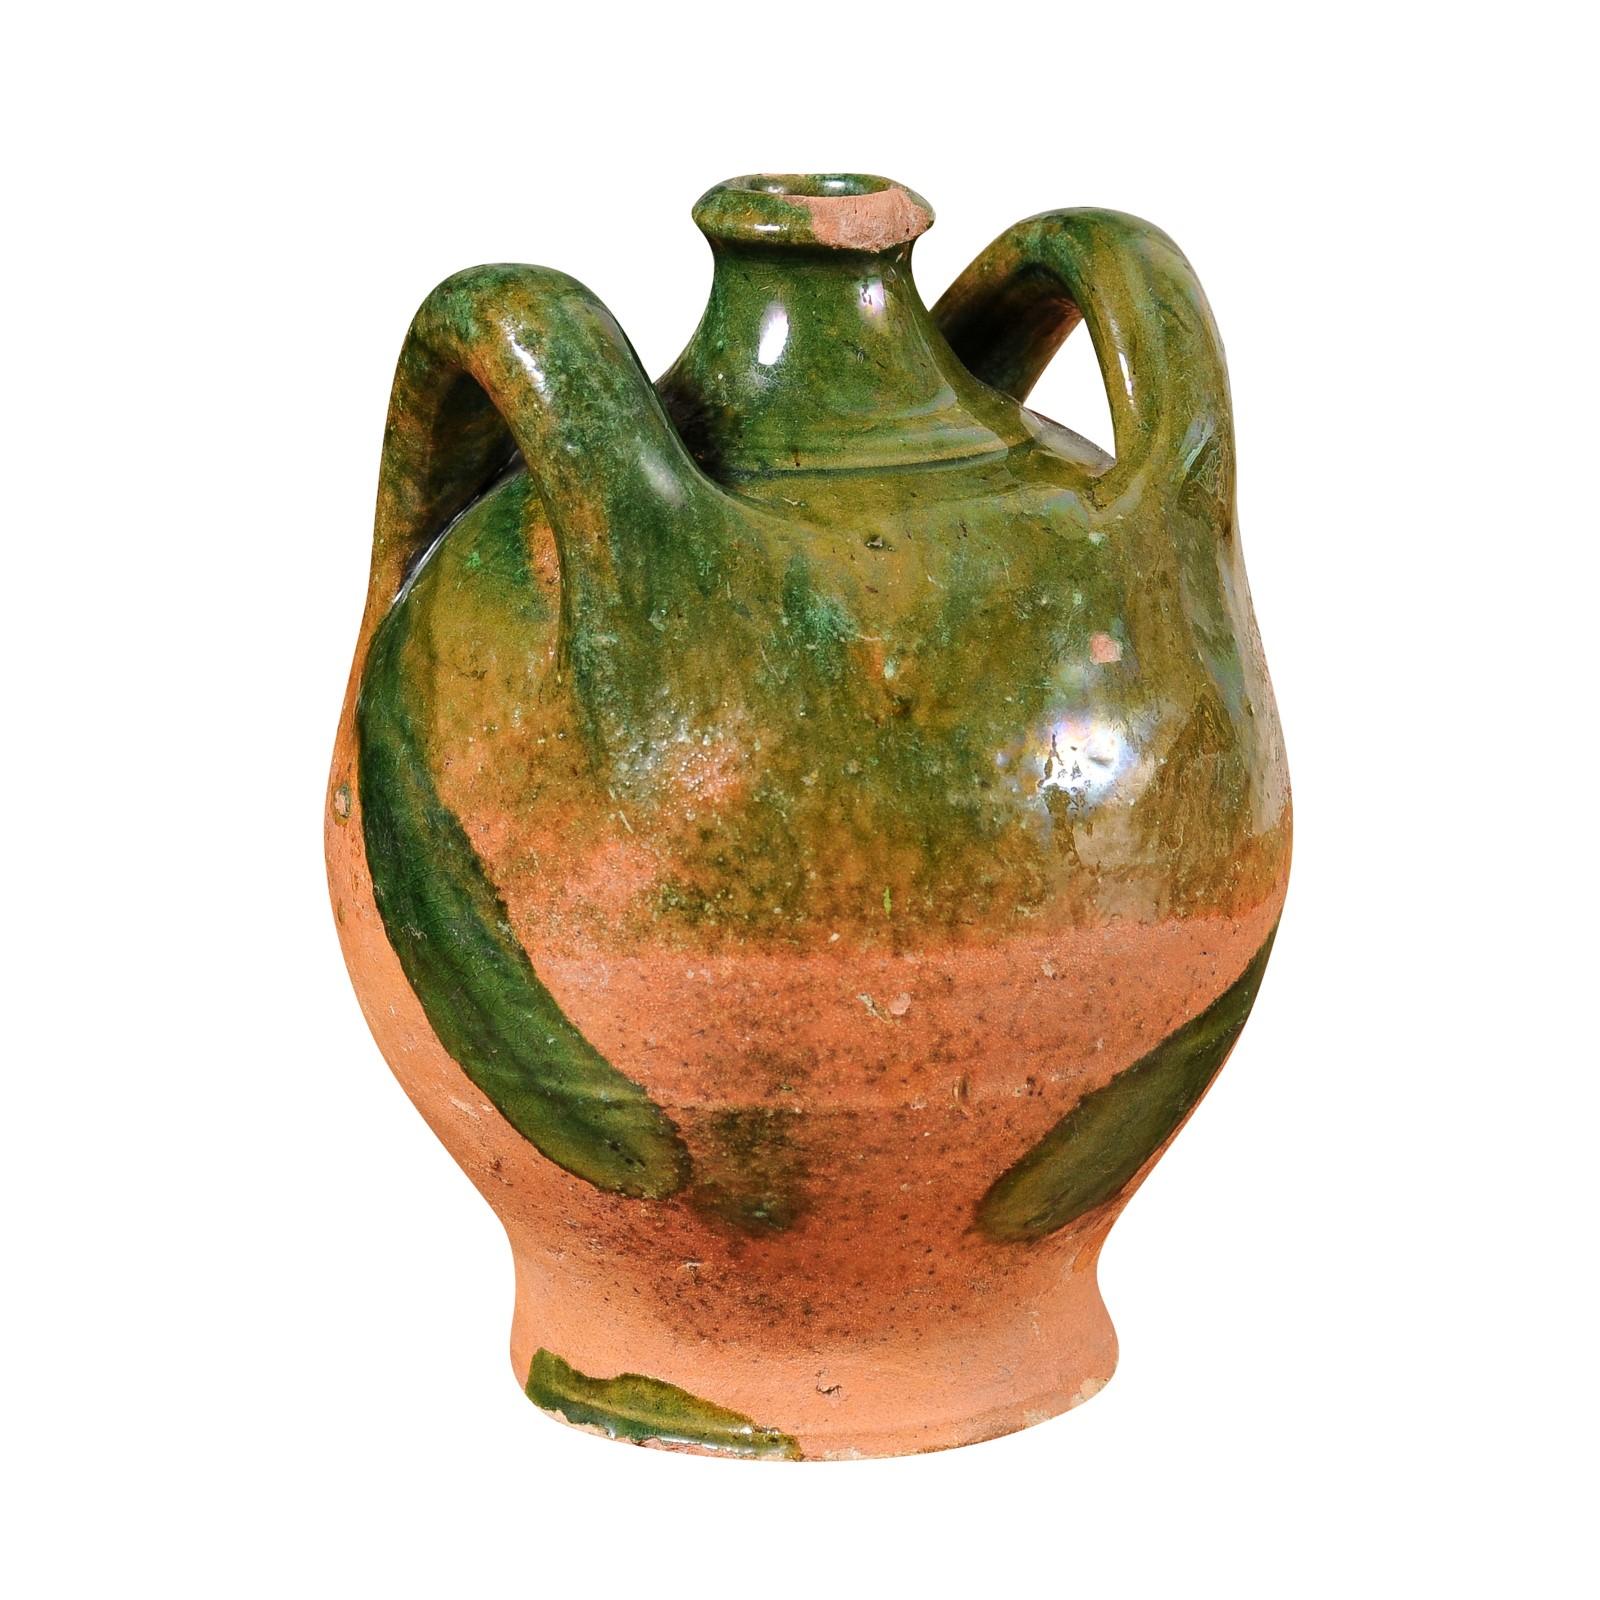 French Provincial 19th Century Green Glazed Pottery Jug with Dual Handles